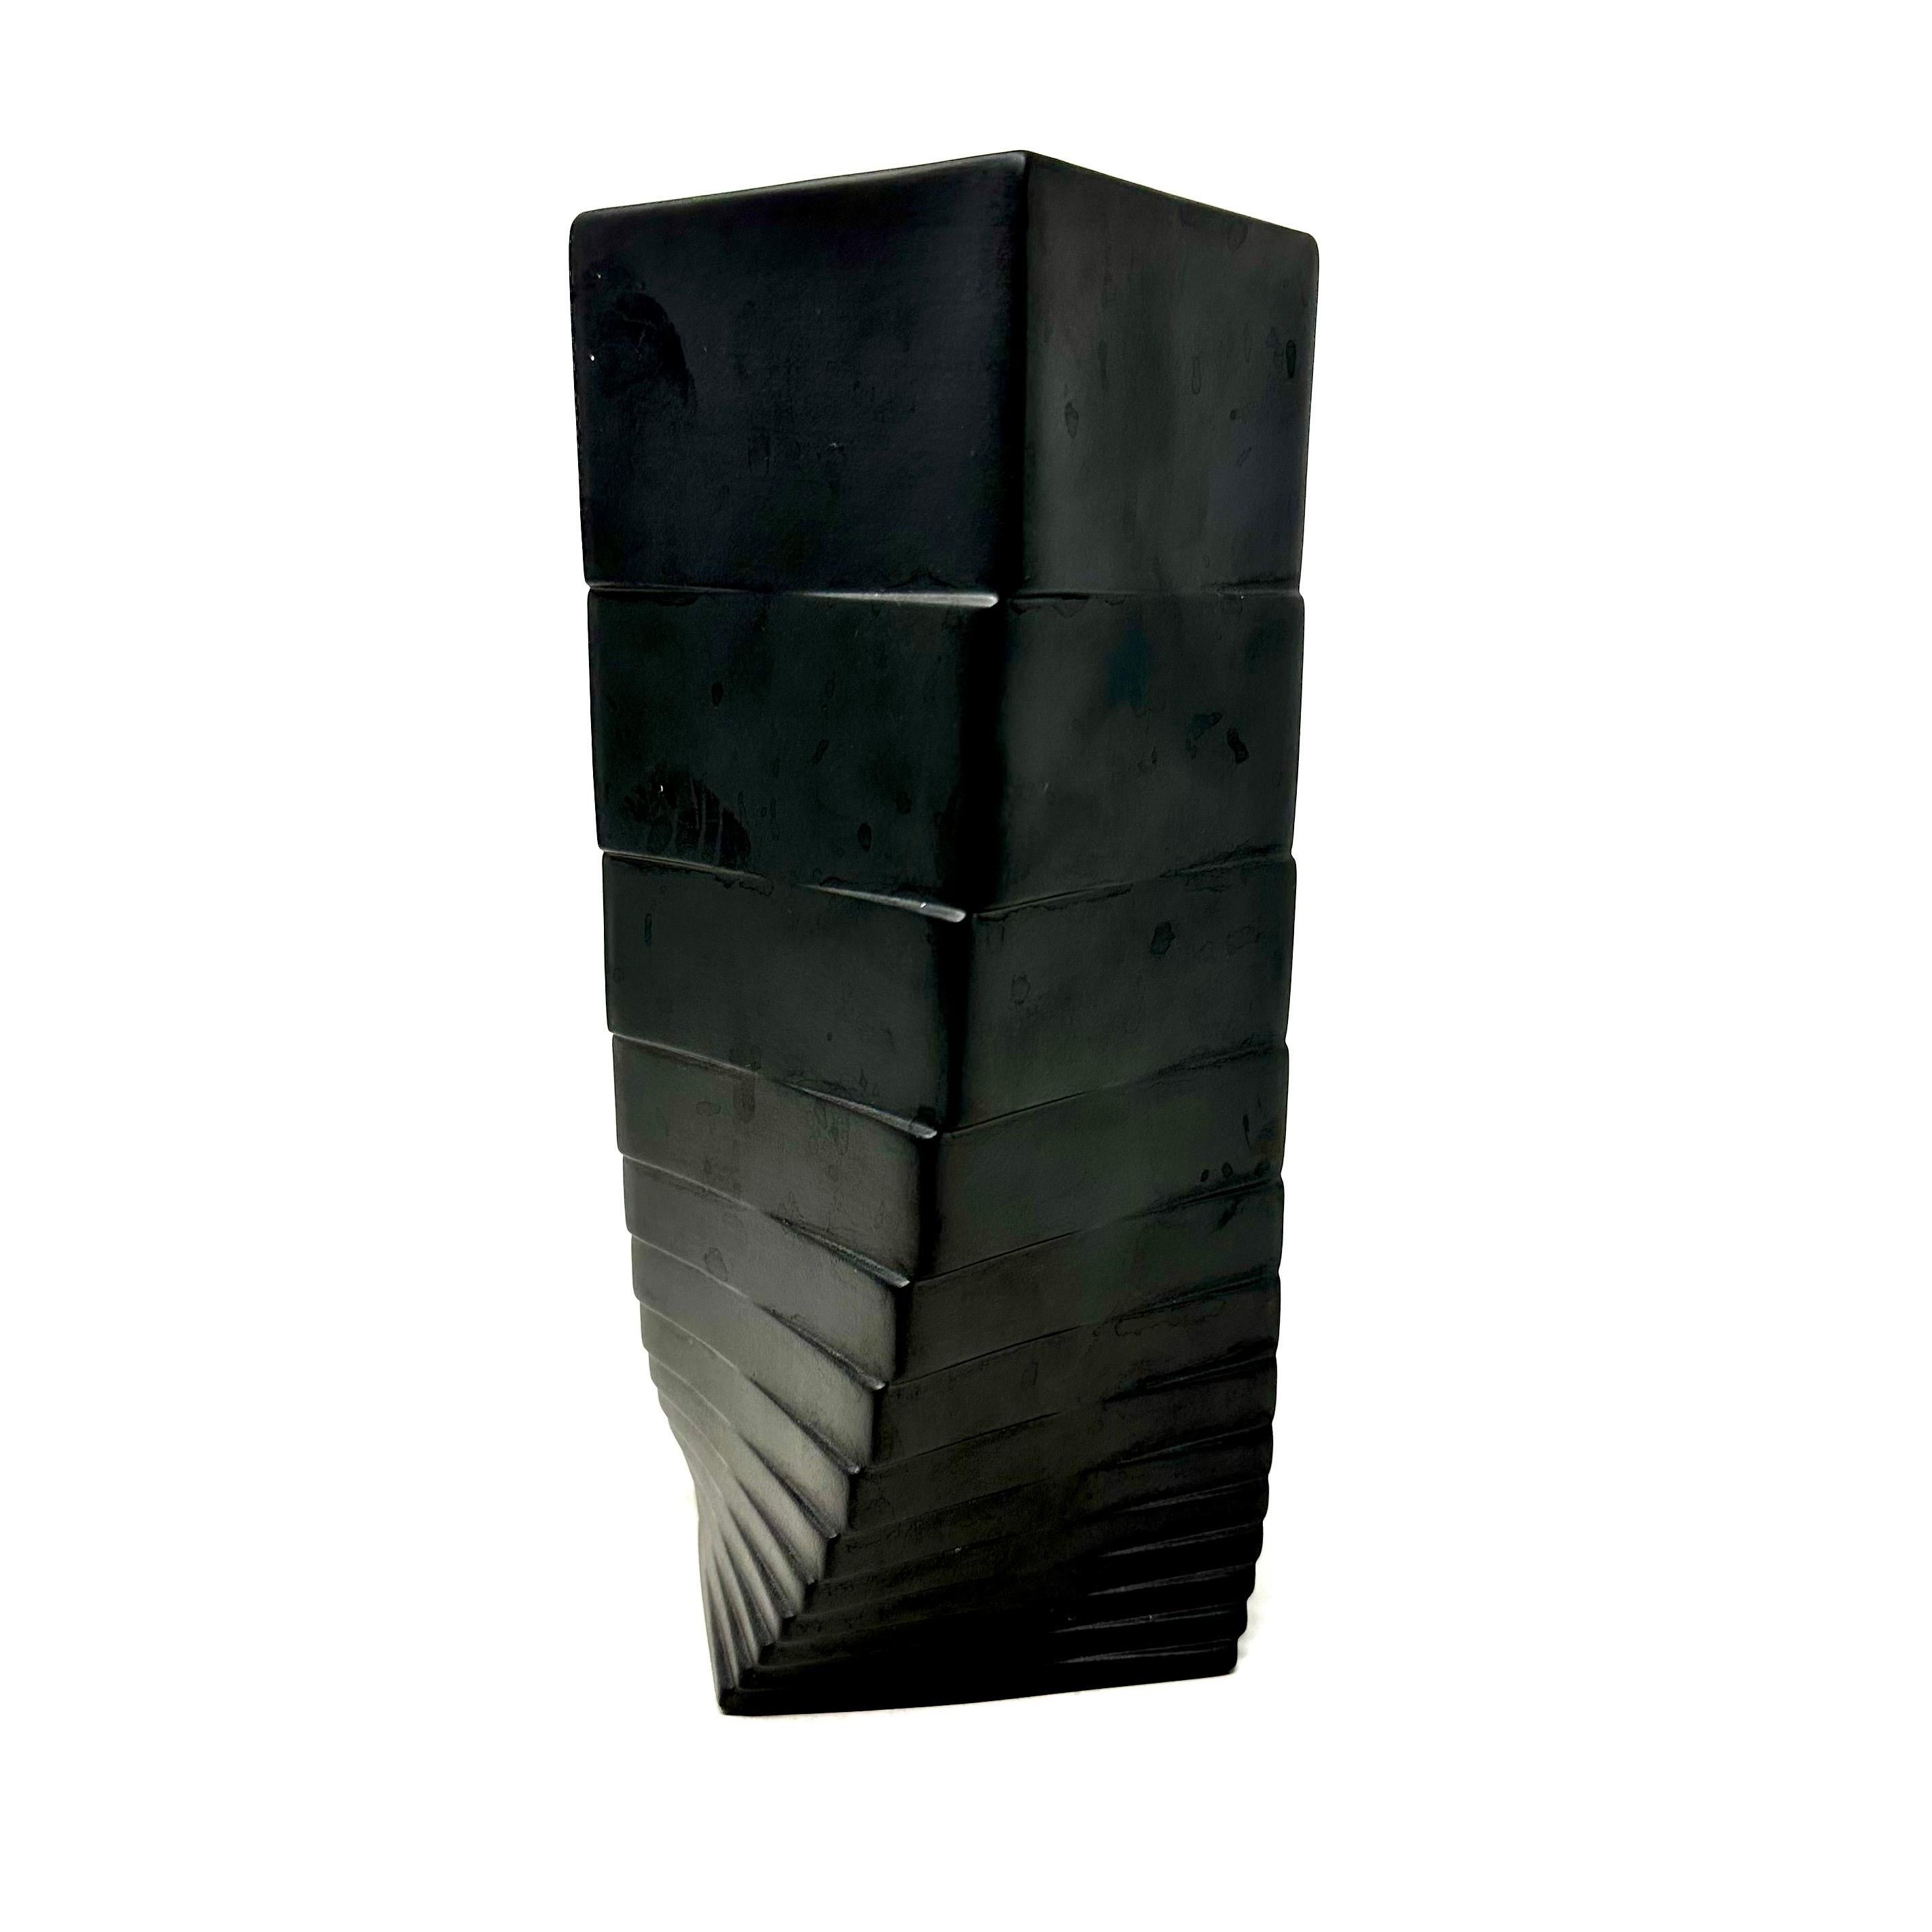 1970s black porcelain bisque Op Art vase by Christa Hausler Goltz for Rosenthal. Marked on the underside. In excellent condition.

Width: 4.5 in / Depth: 4.5 in / Height: 8.5 in.

